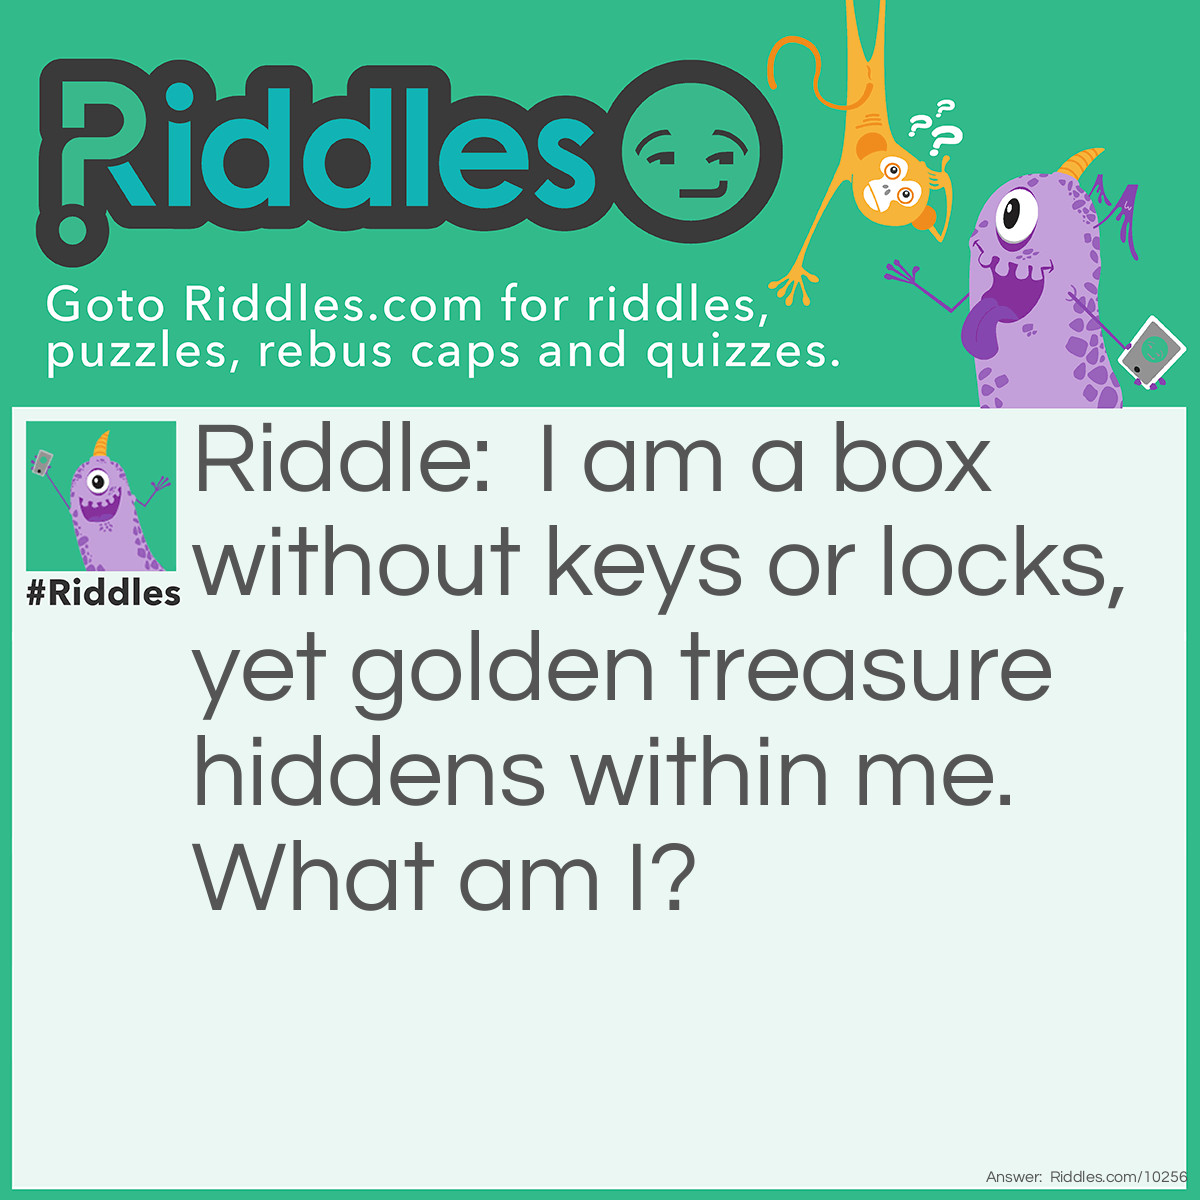 Riddle: I am a box without keys or locks, yet golden treasure hiddens within me. What am I? Answer: An egg!